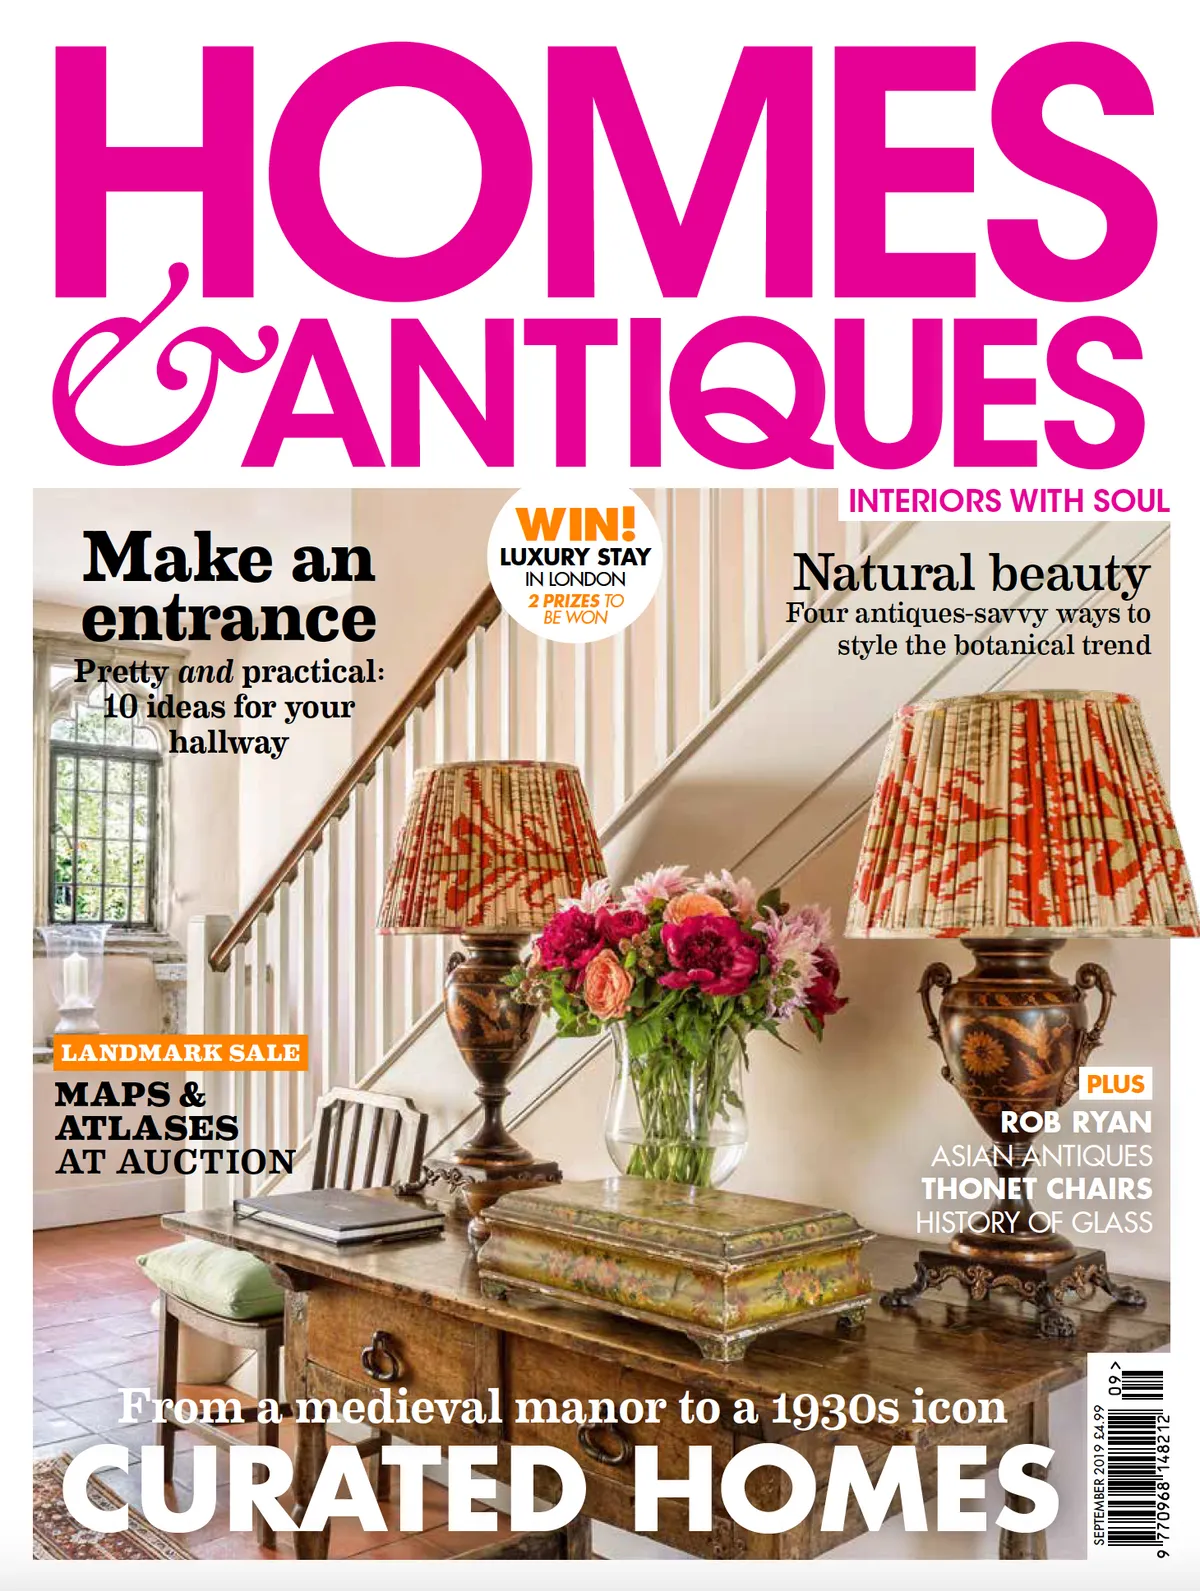 Homes & Antiques: September 2019 cover